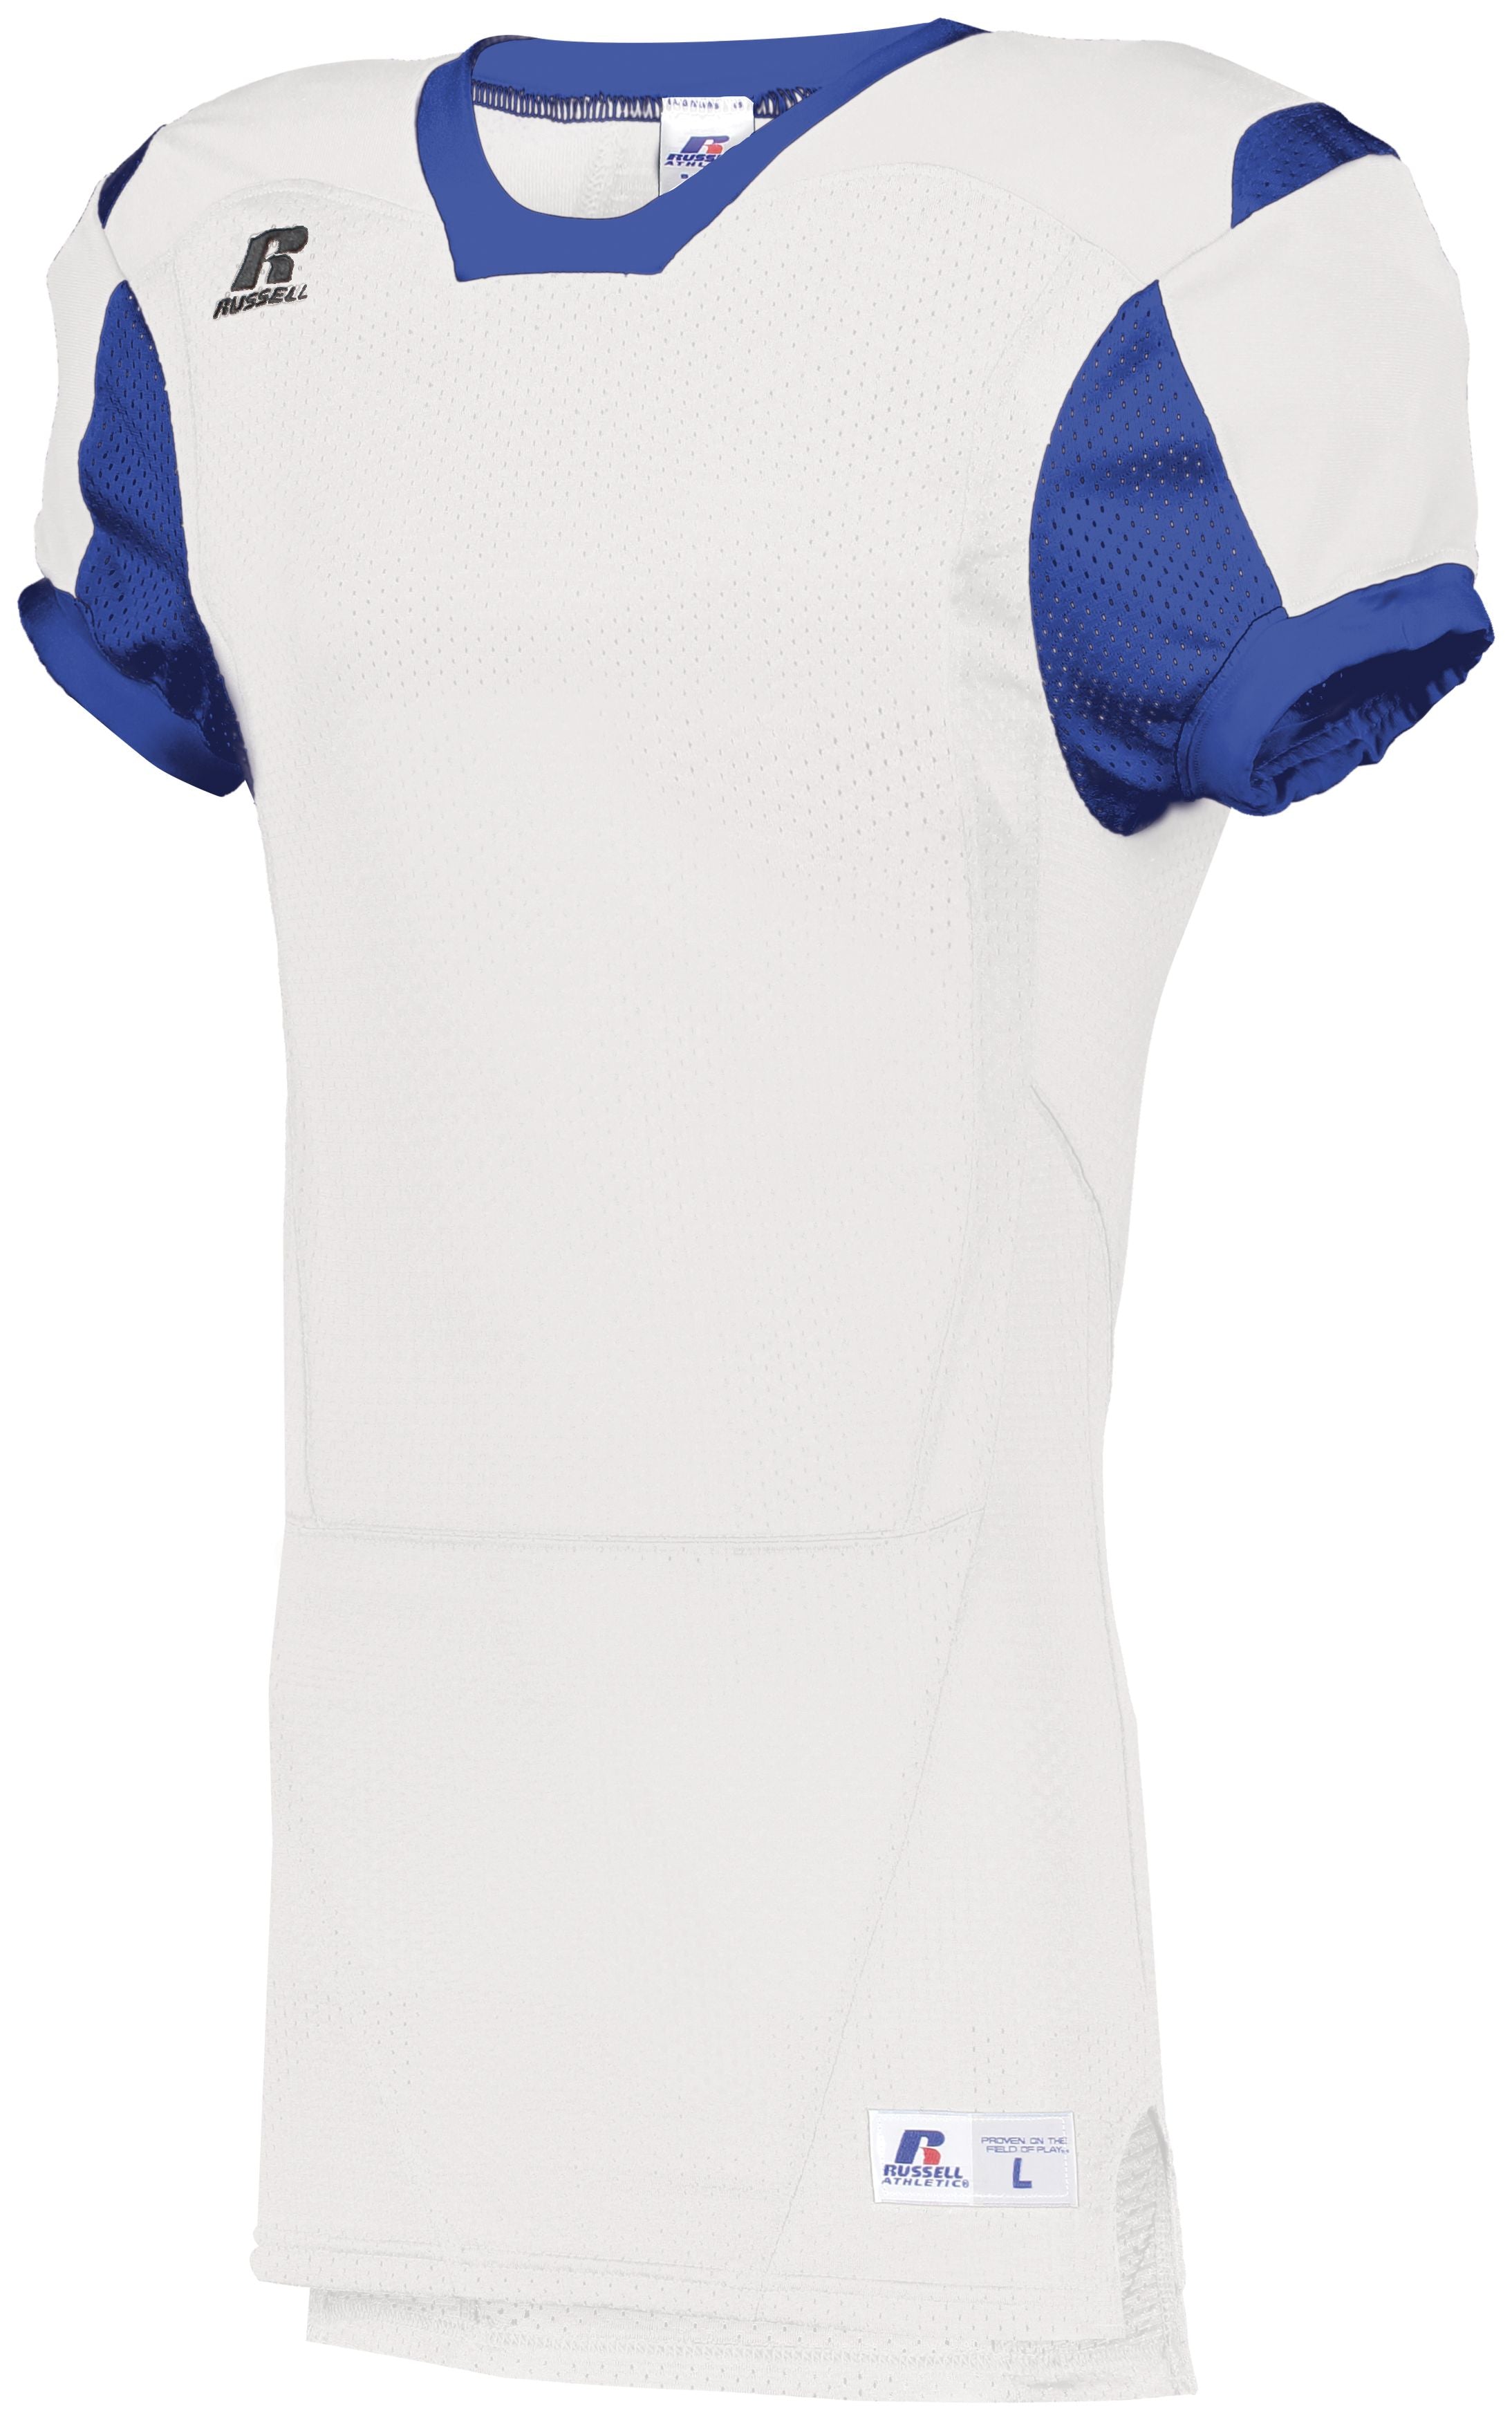 Russell Athletic Color Block Game Jersey in White/Royal  -Part of the Adult, Adult-Jersey, Football, Russell-Athletic-Products, Shirts, All-Sports, All-Sports-1 product lines at KanaleyCreations.com